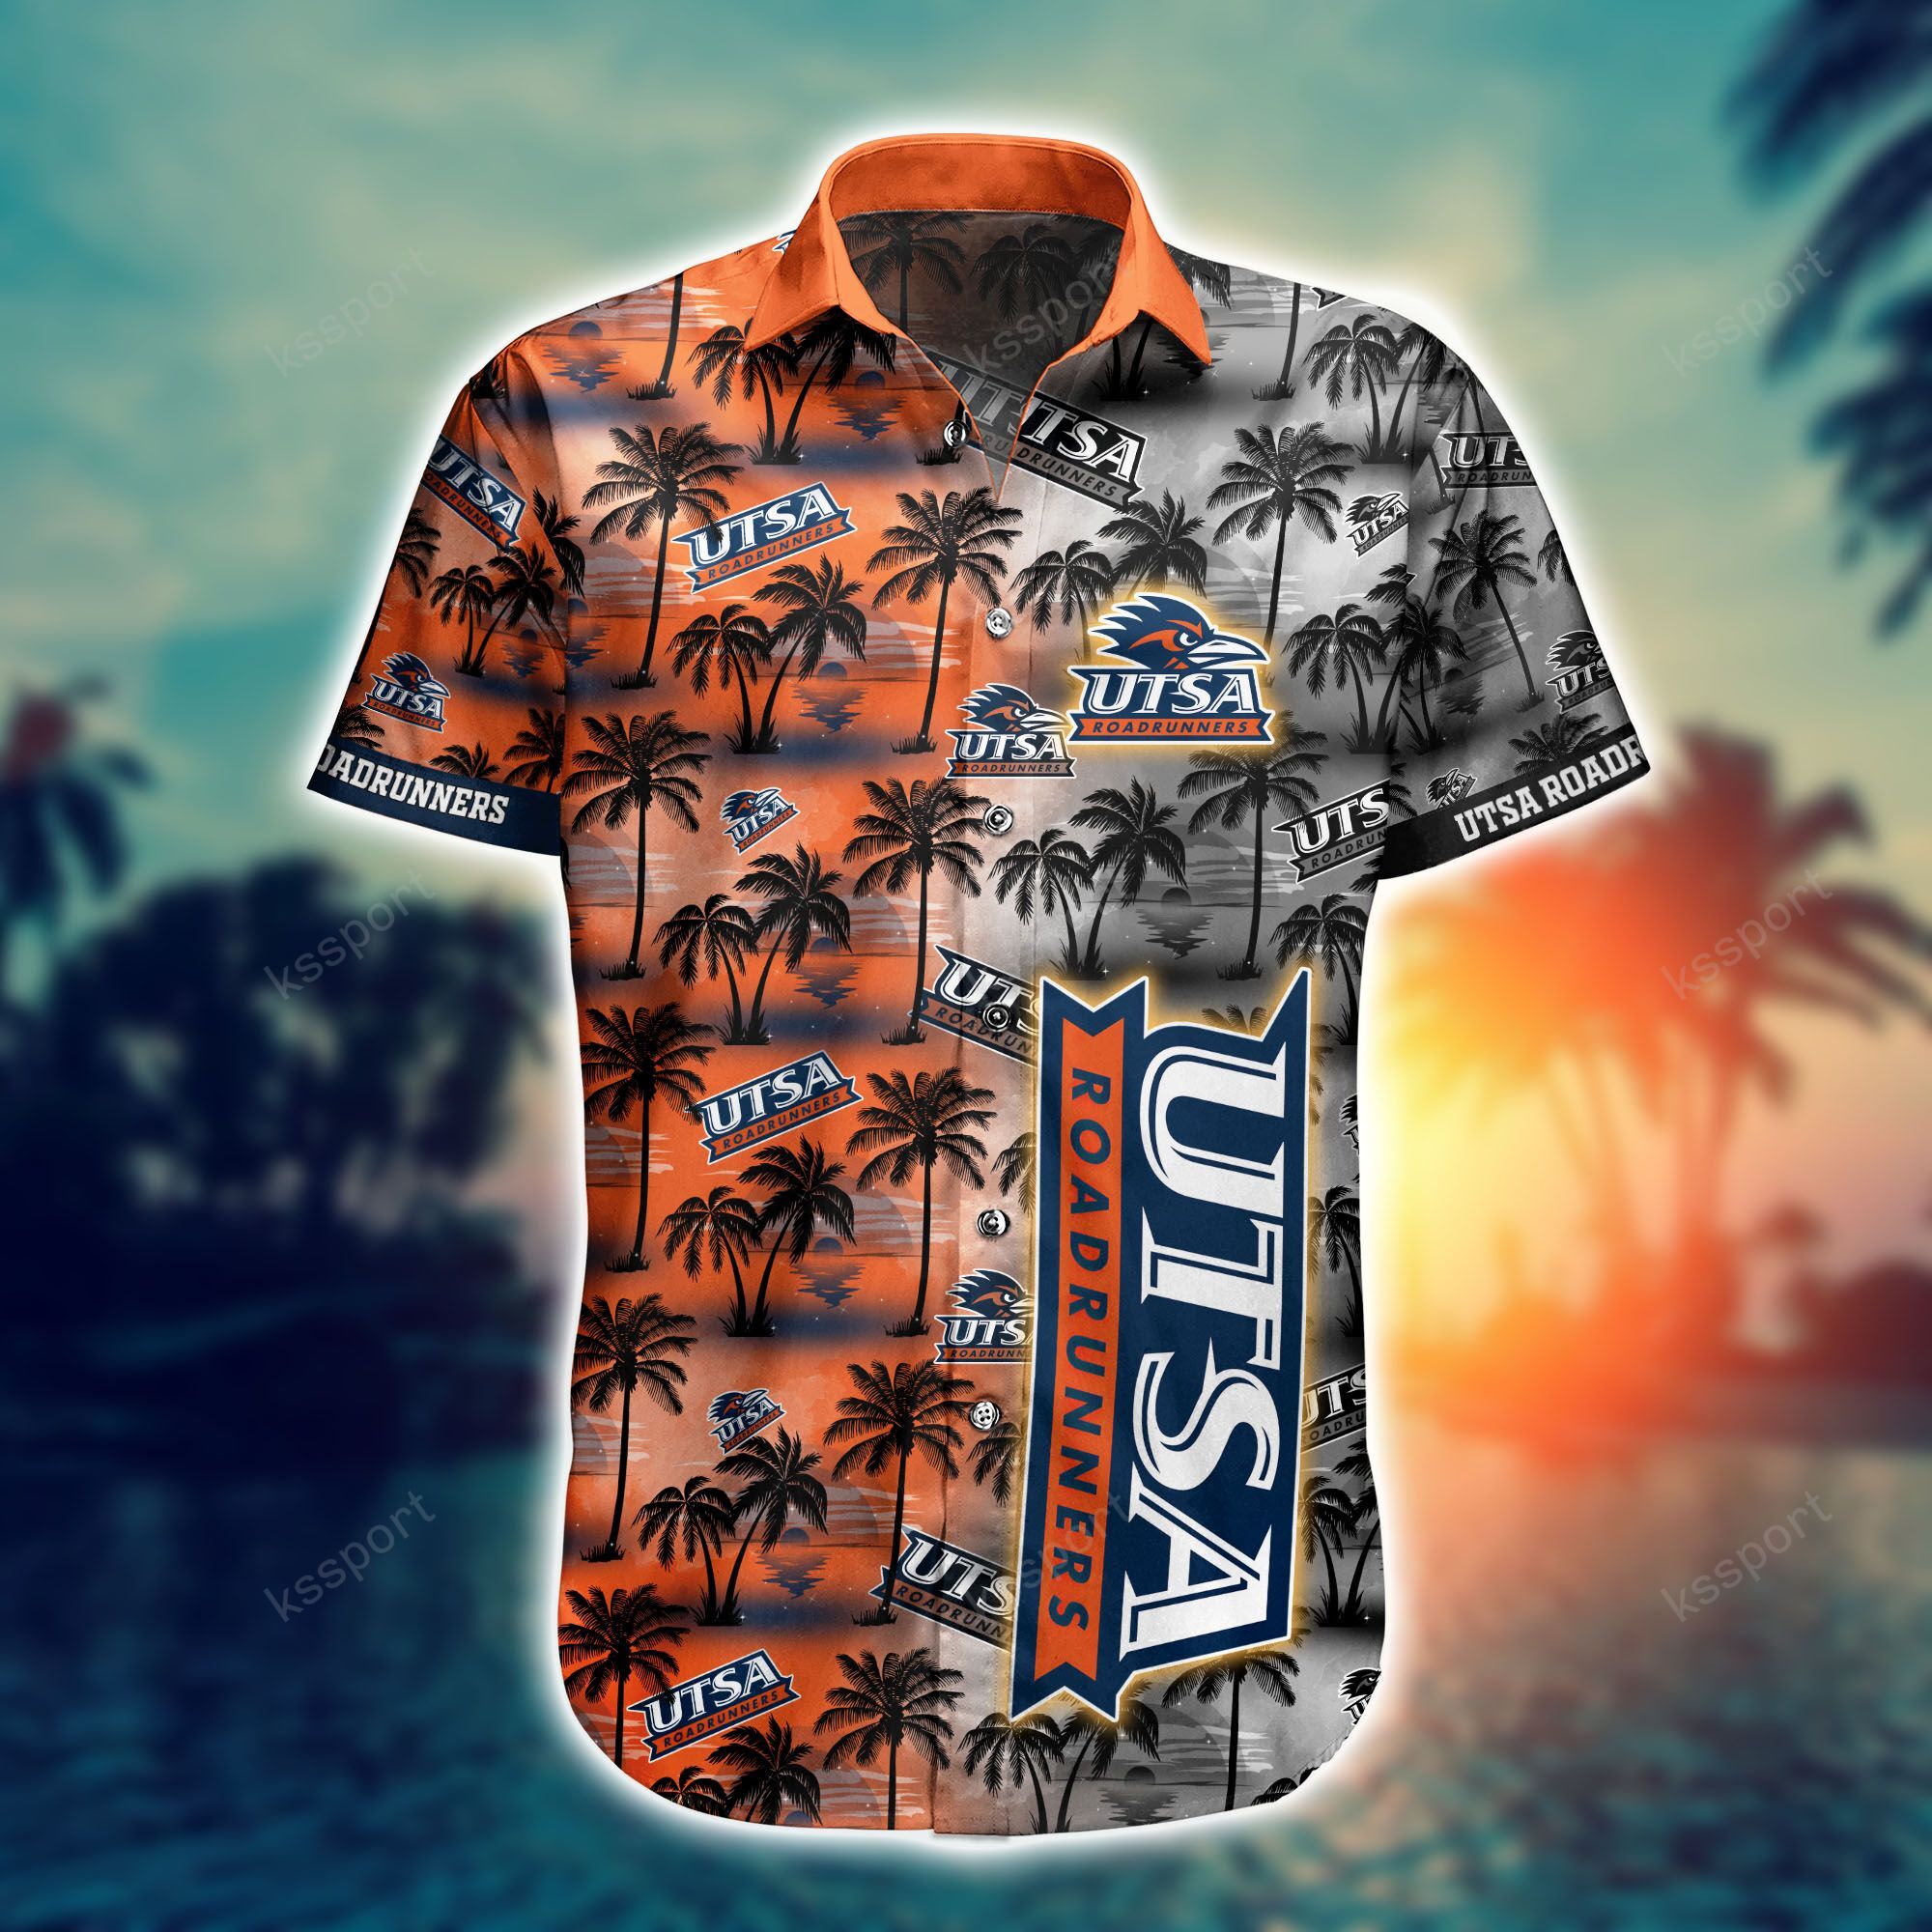 Top cool Hawaiian shirt 2022 - Make sure you get yours today before they run out! 184